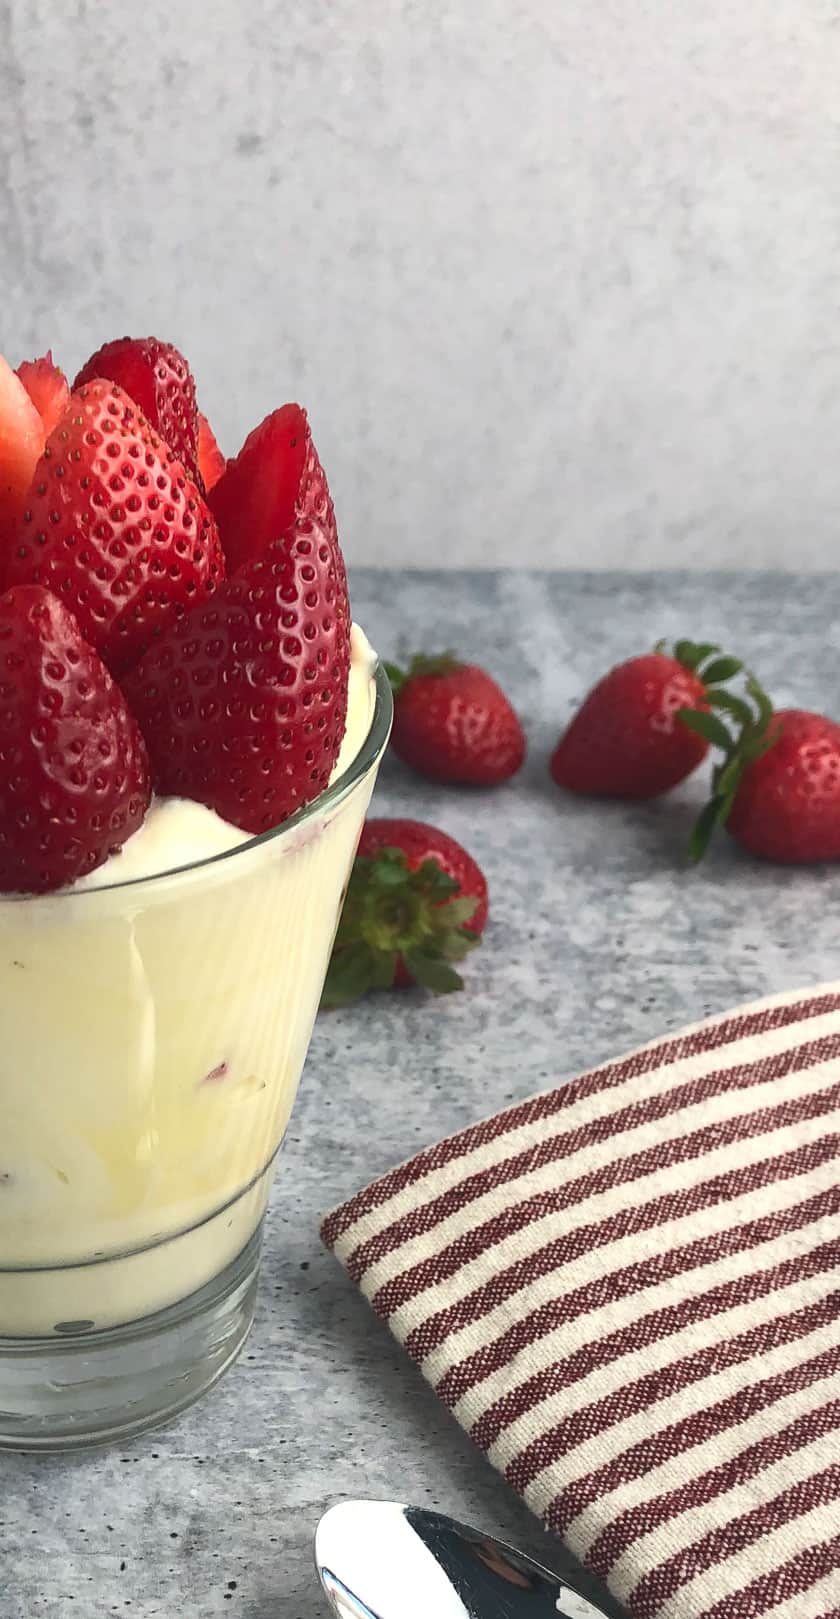 A bowl of creamy strawberry pudding. Dig In!